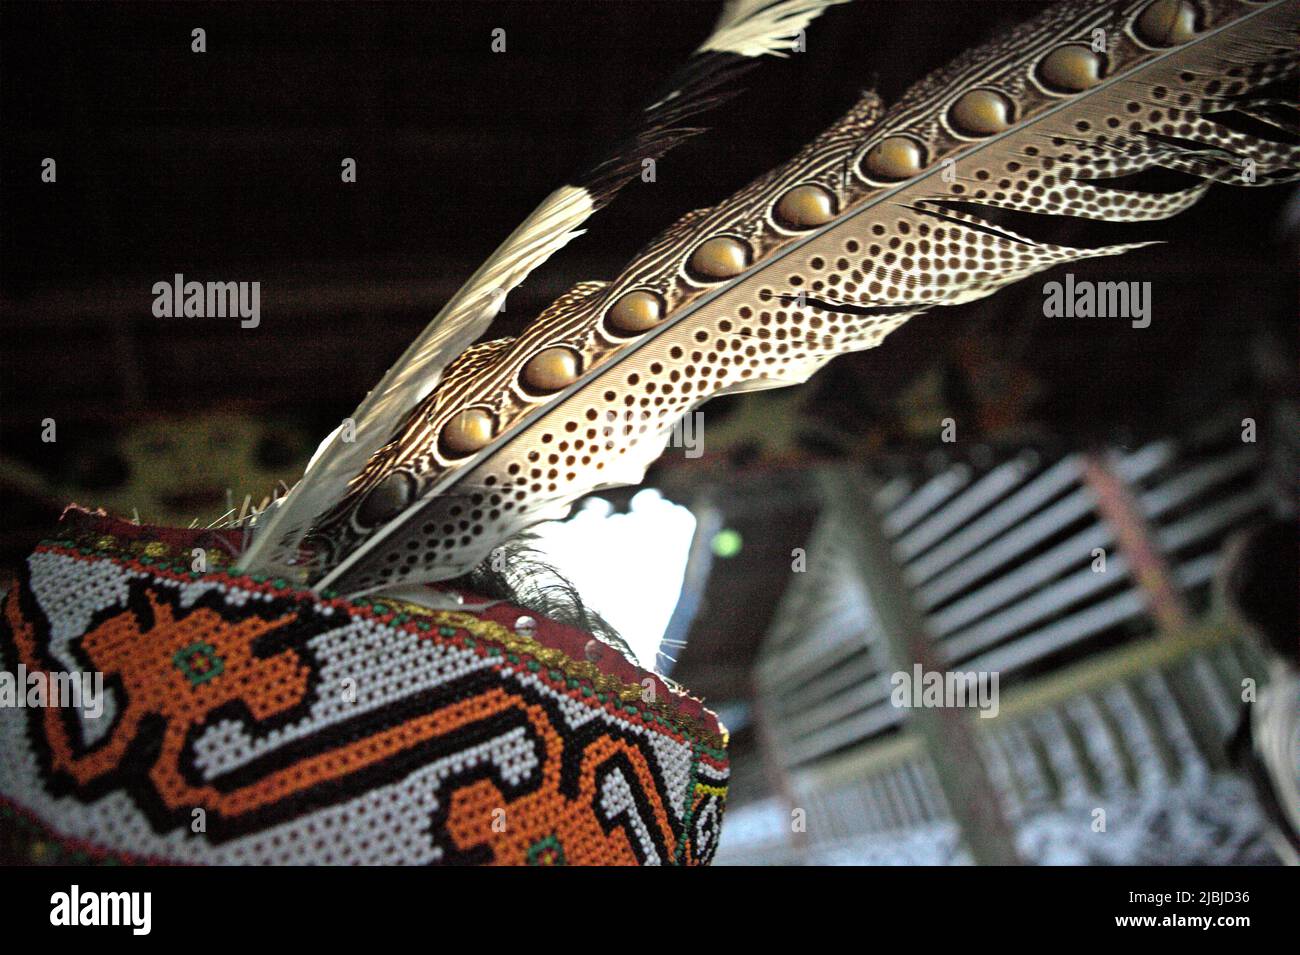 Traditional head accessory made of hornbill feather is seen during an ecotourism event at Bali Gundi longhouse of traditional Dayak Taman community in Sibau Hulu, Putussibau Utara, Kapuas Hulu, West Kalimantan, Indonesia. Stock Photo